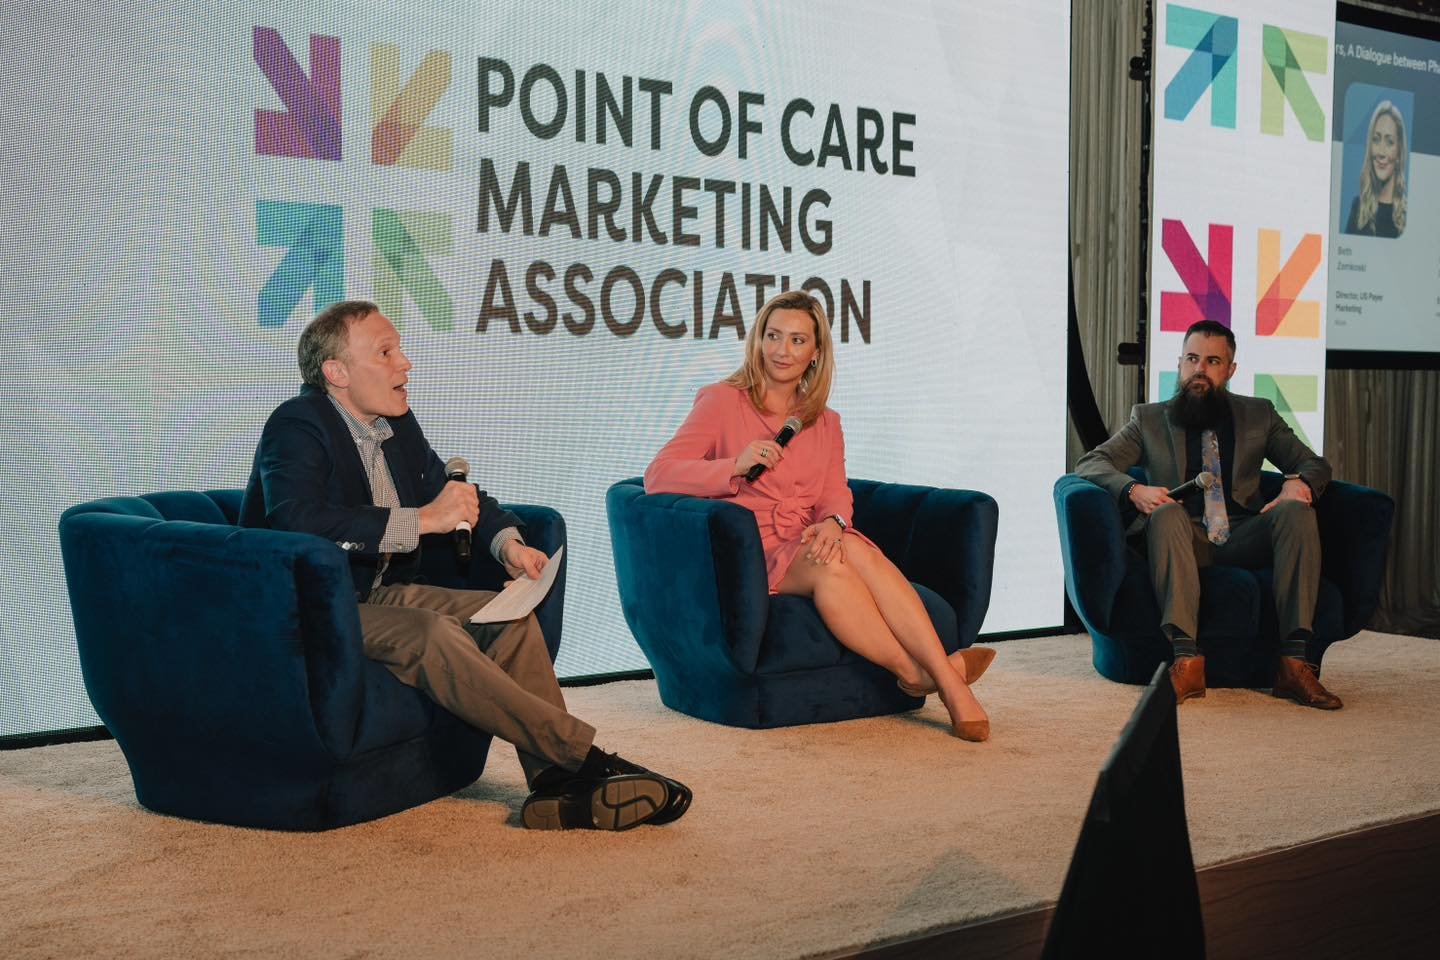 Throwback Thursday: last month I had the great opportunity to travel to New York to speak to the Point of Care Marketing Association about trends and opportunities in rural healthcare. Rural community pharmacy has been the passion of my career and I 